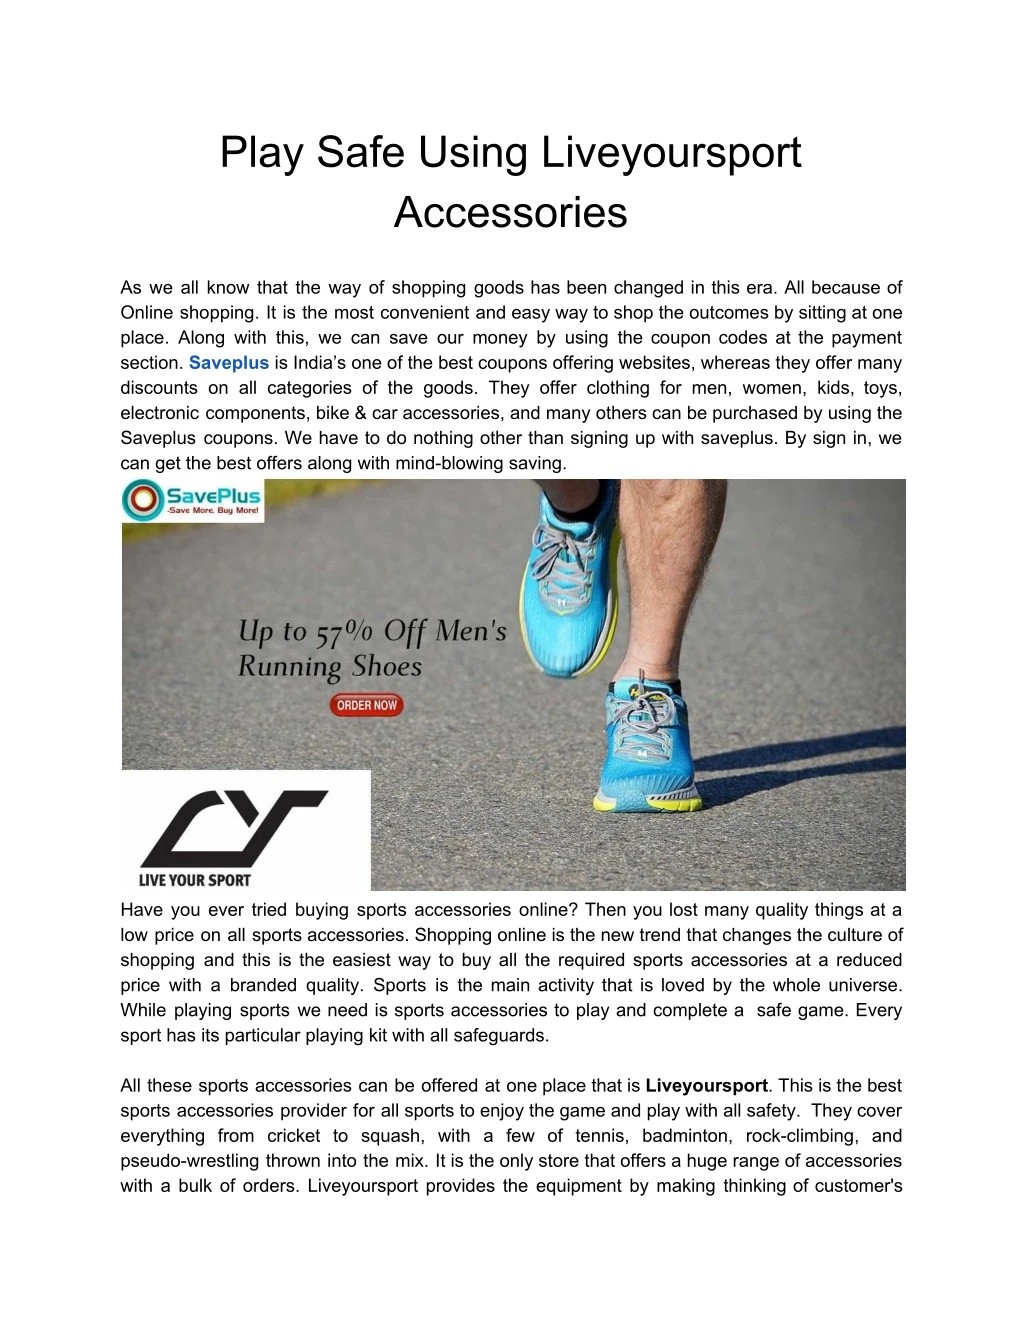 play safe using liveyoursport accessories